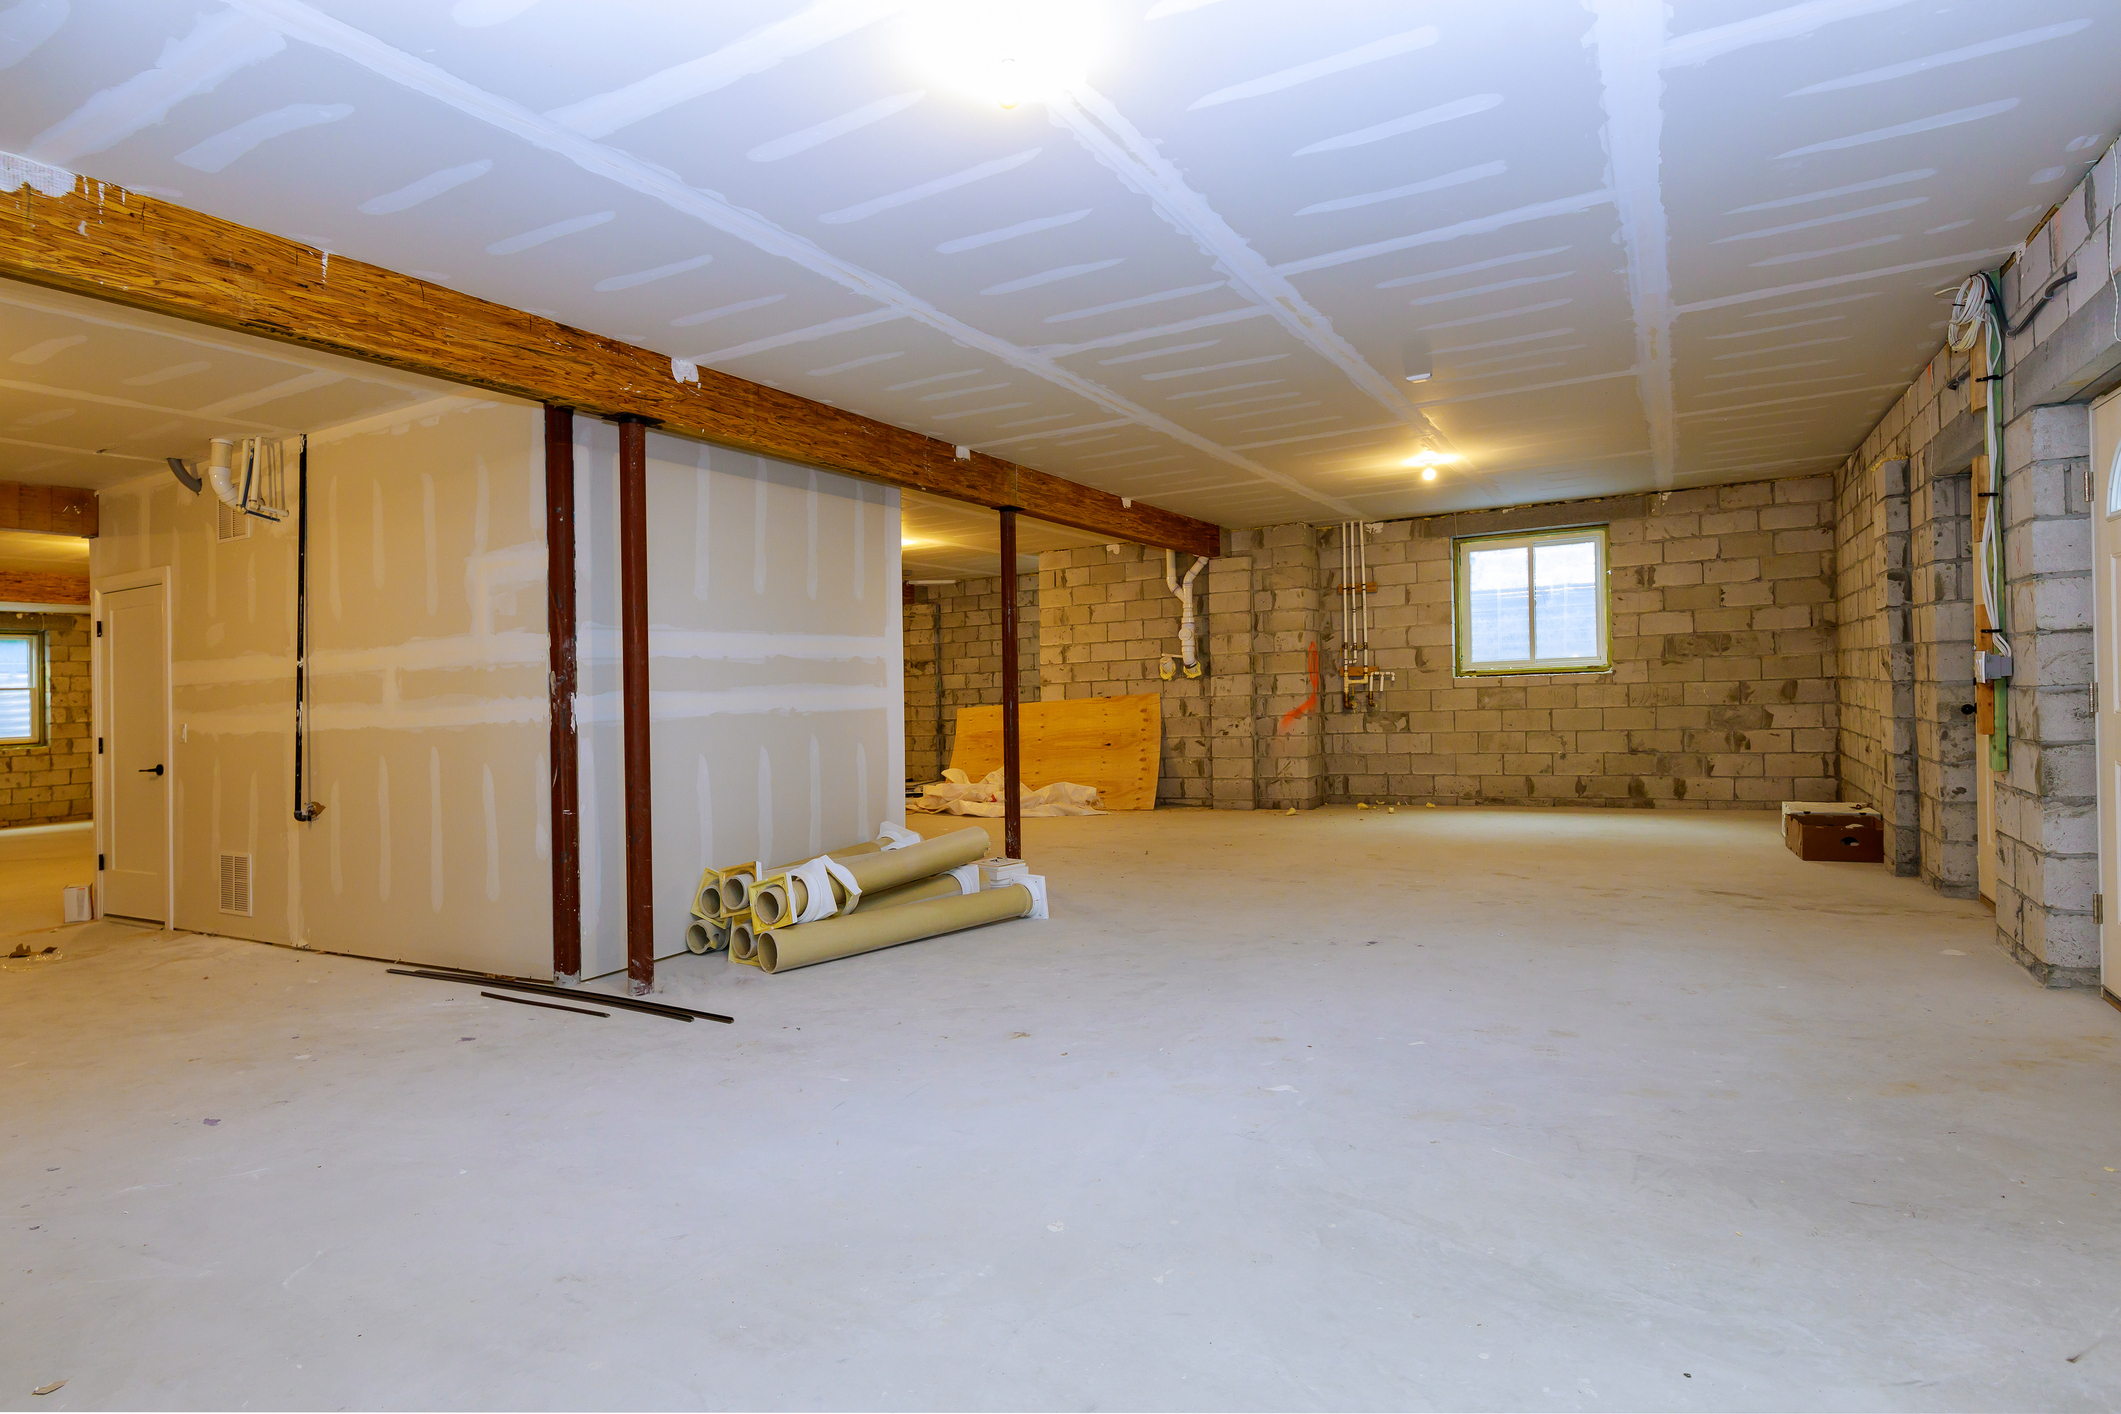 New open floorplan in basement with an engineered beam and lally column posts